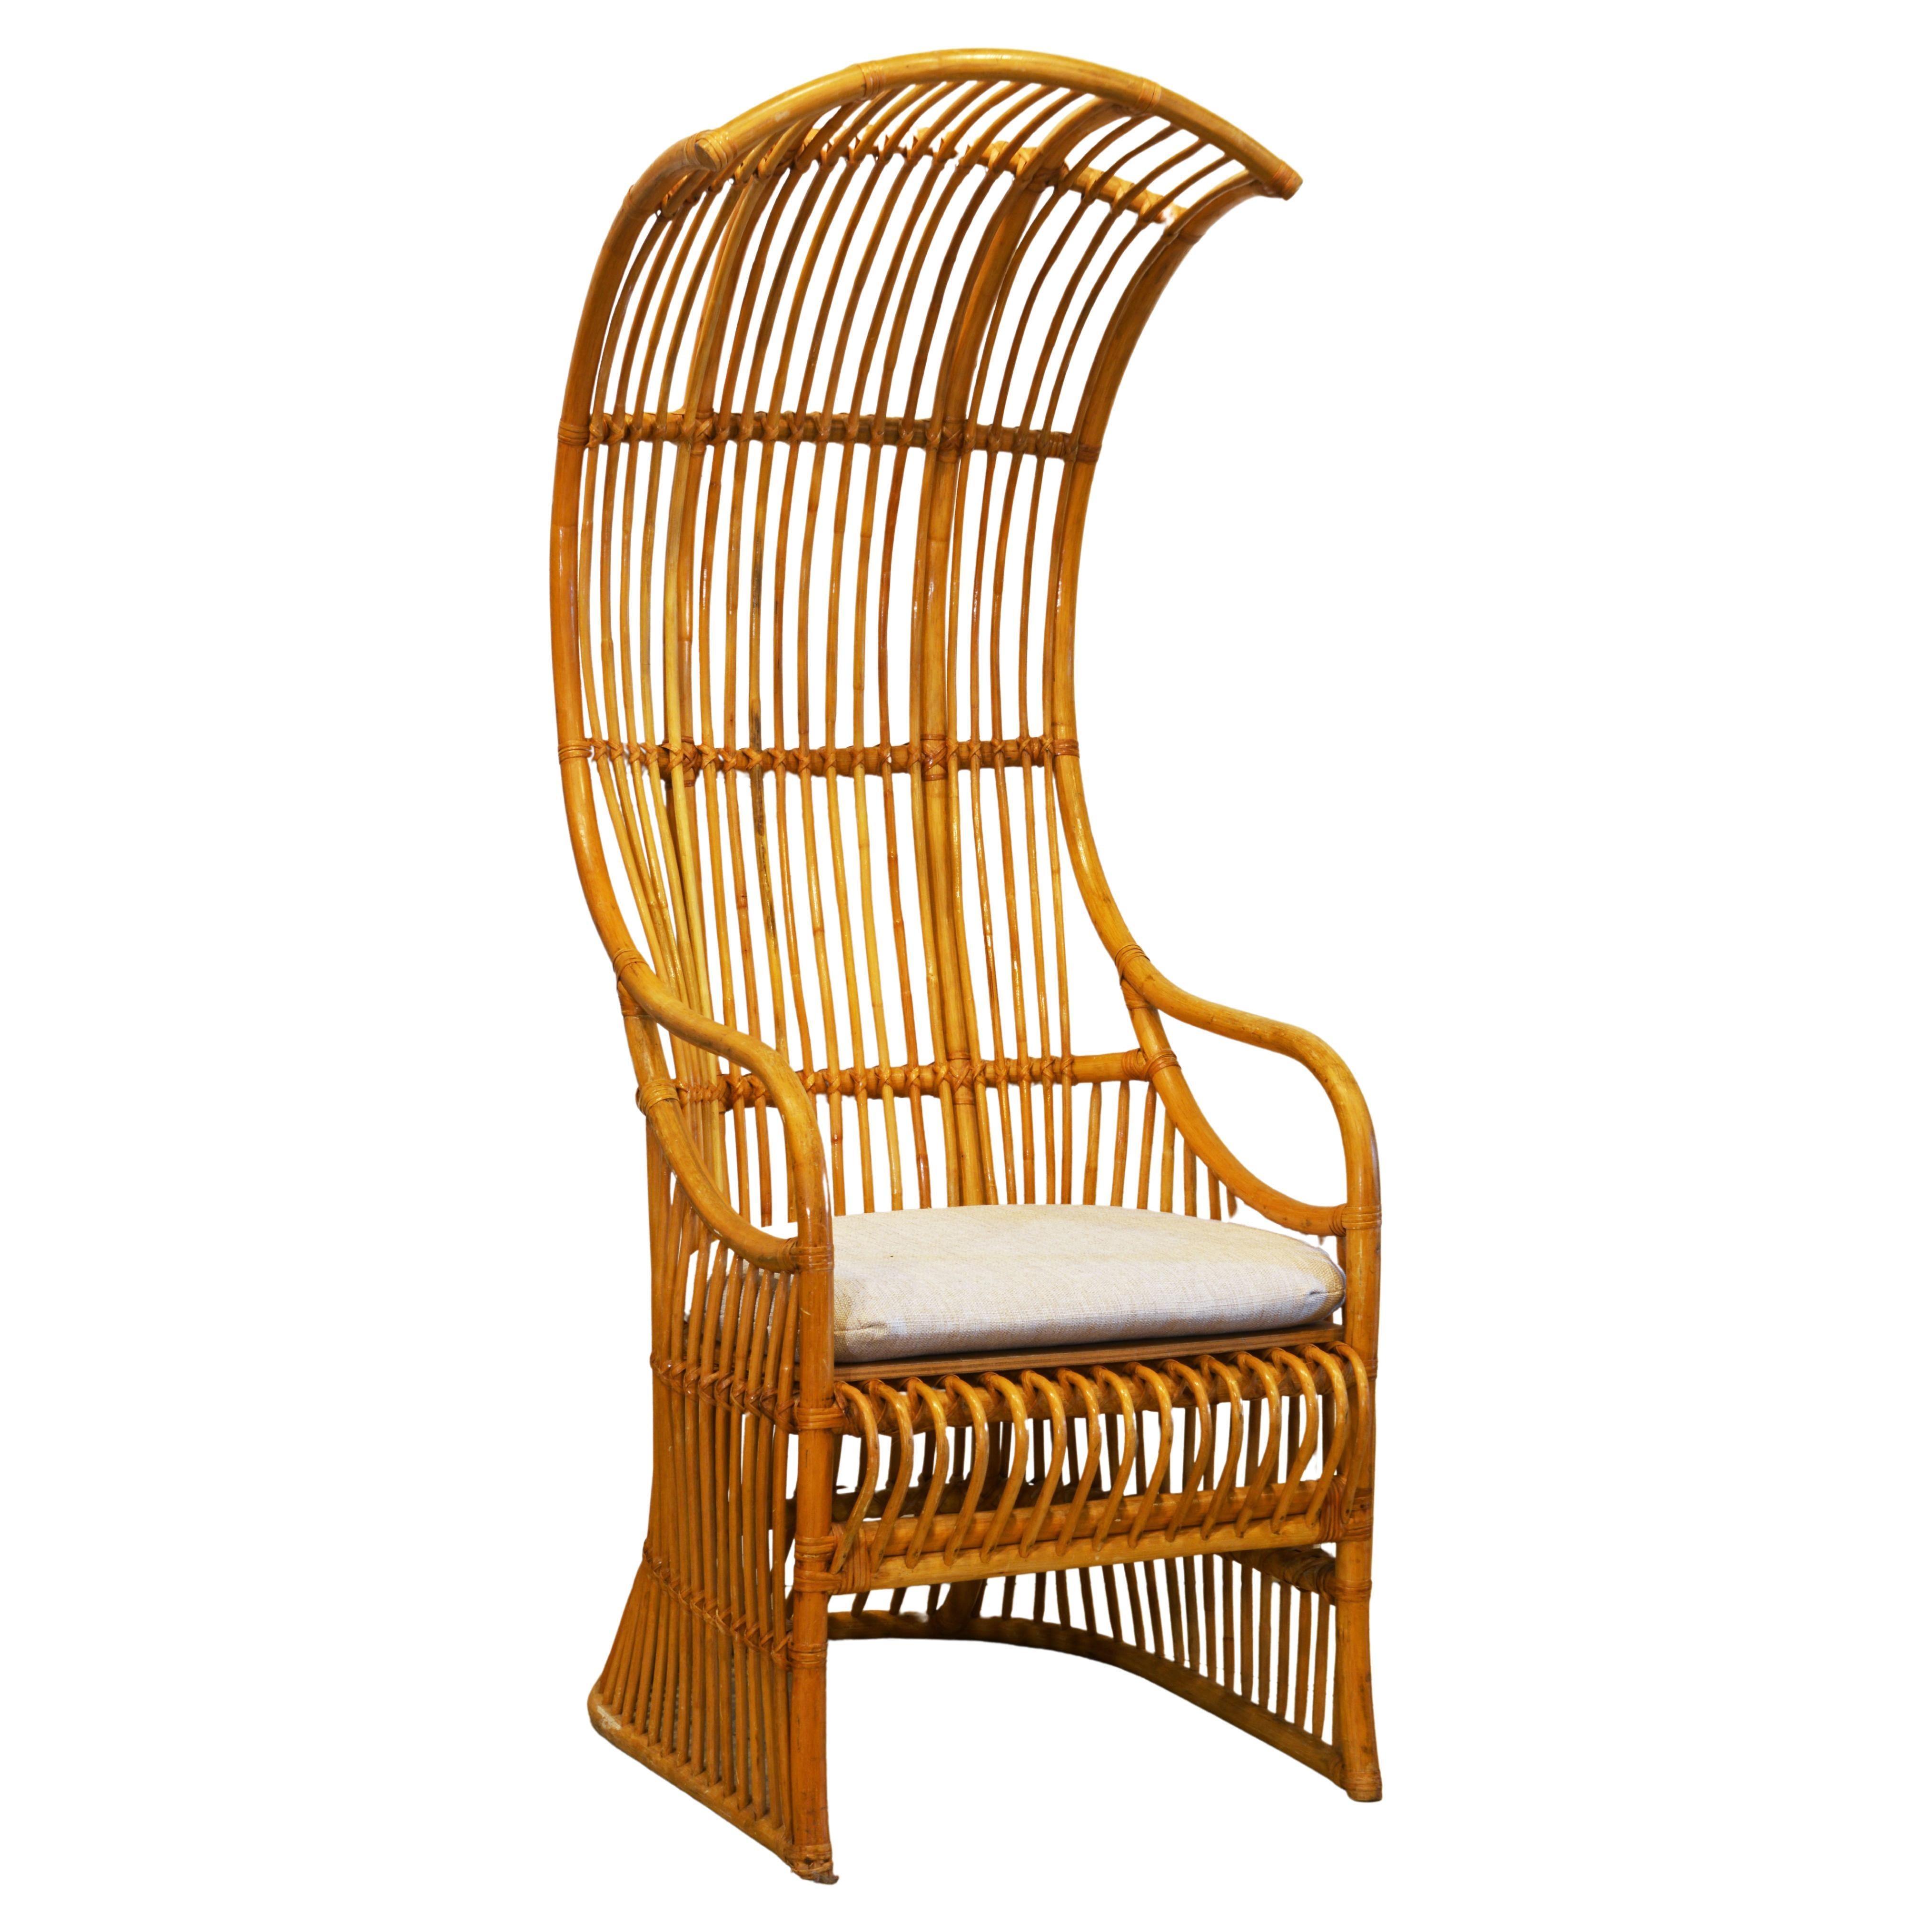 Sculptural Organic Form Bamboo and Rattan Canope Chair Manner of Franco Albini